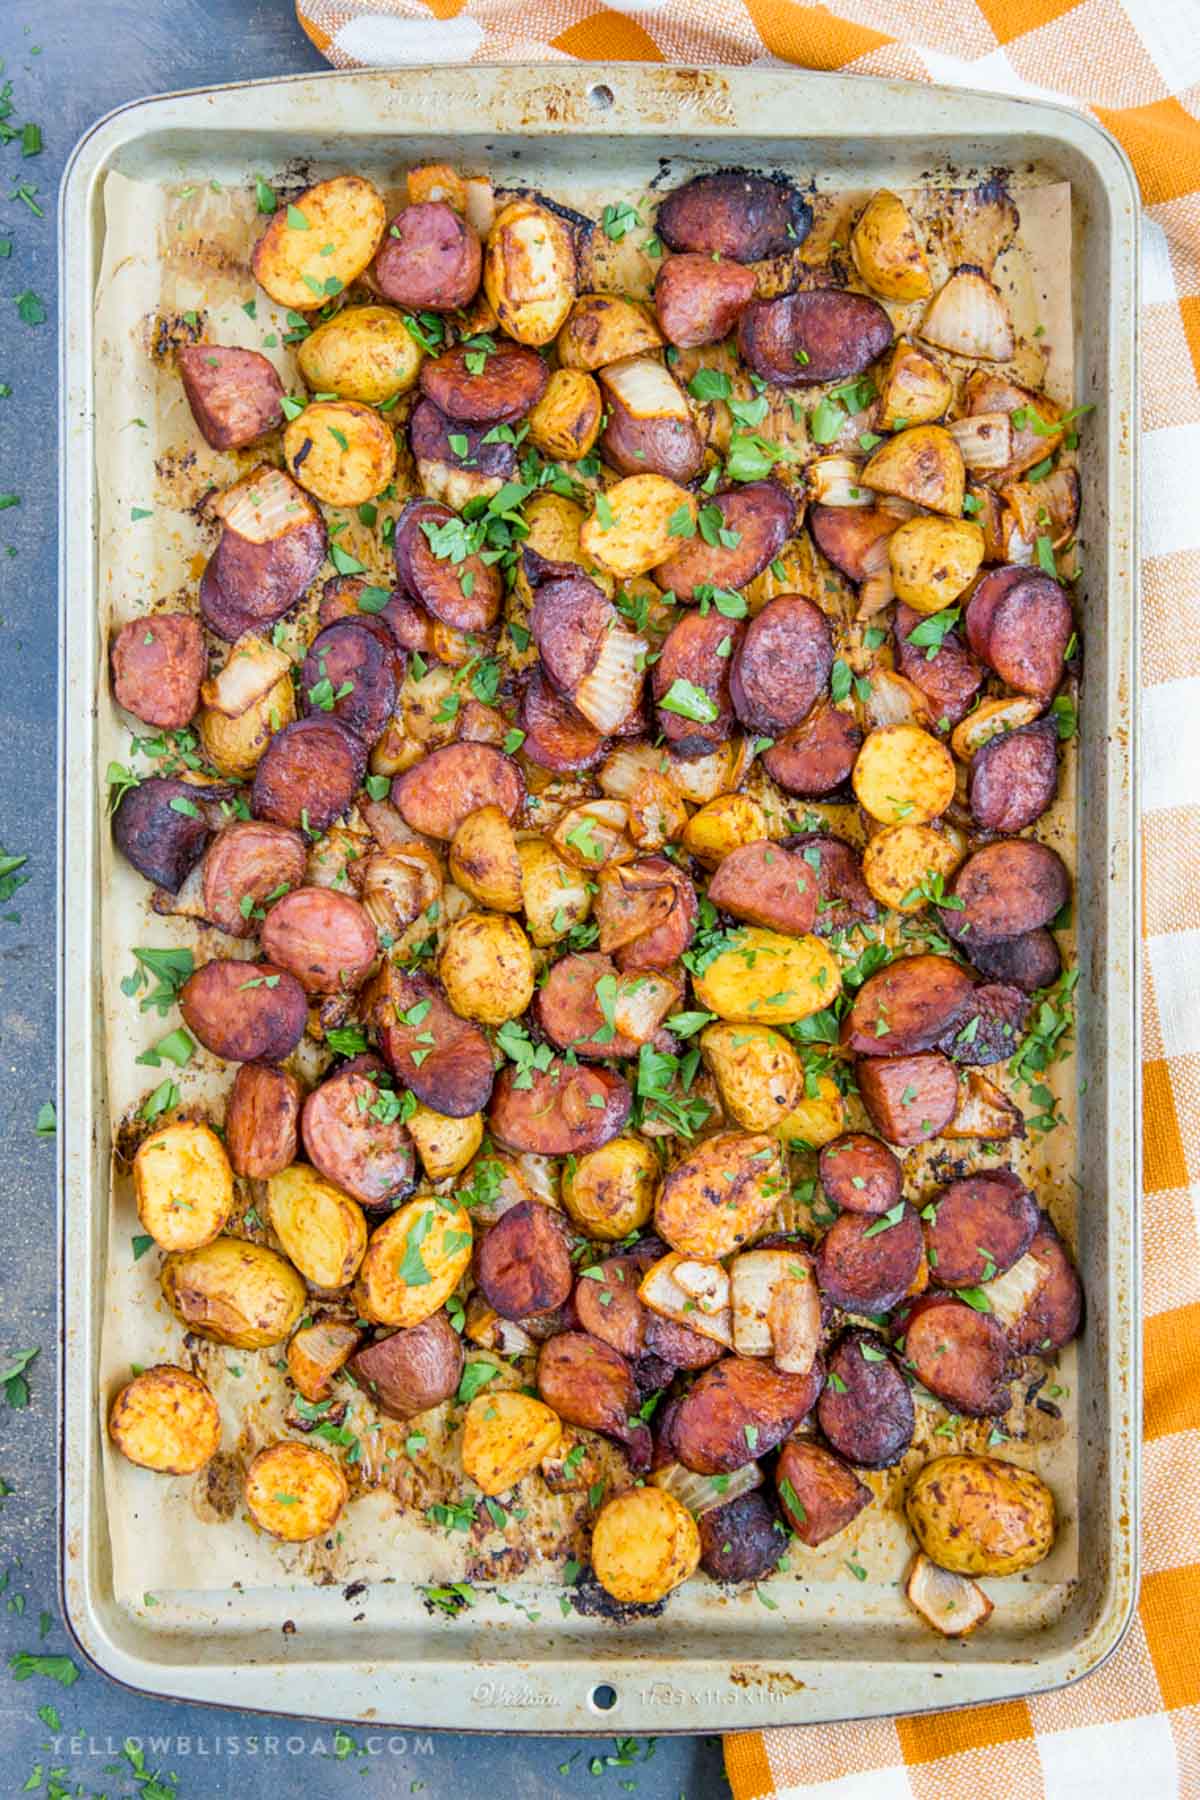 sheet pan with smoked sausage slices, potatoes and onions